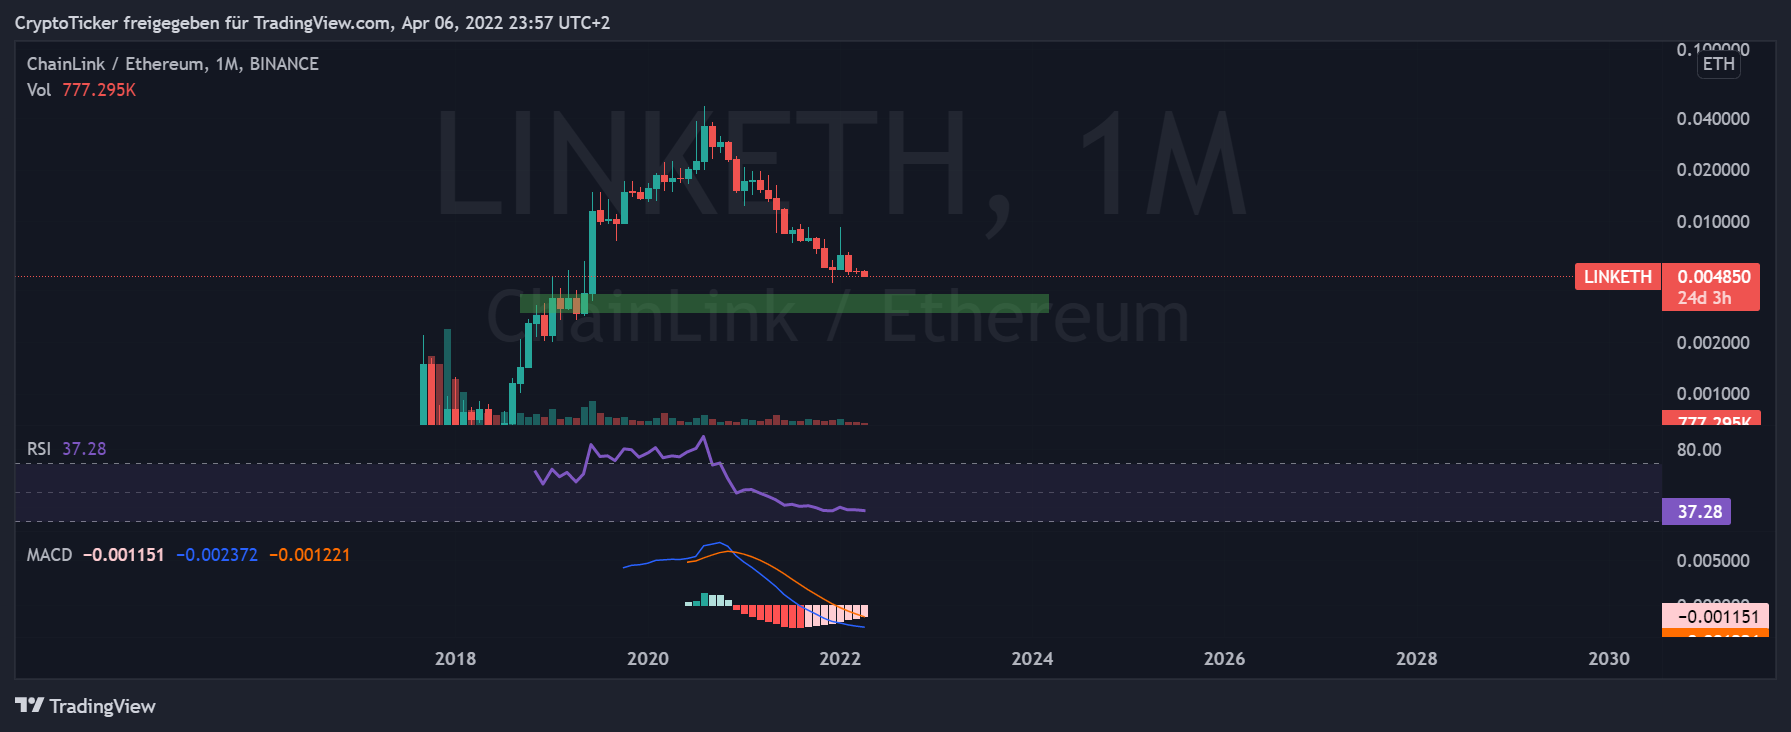 LINK/ETH 1-month chart showing how ETH outperformed LINK